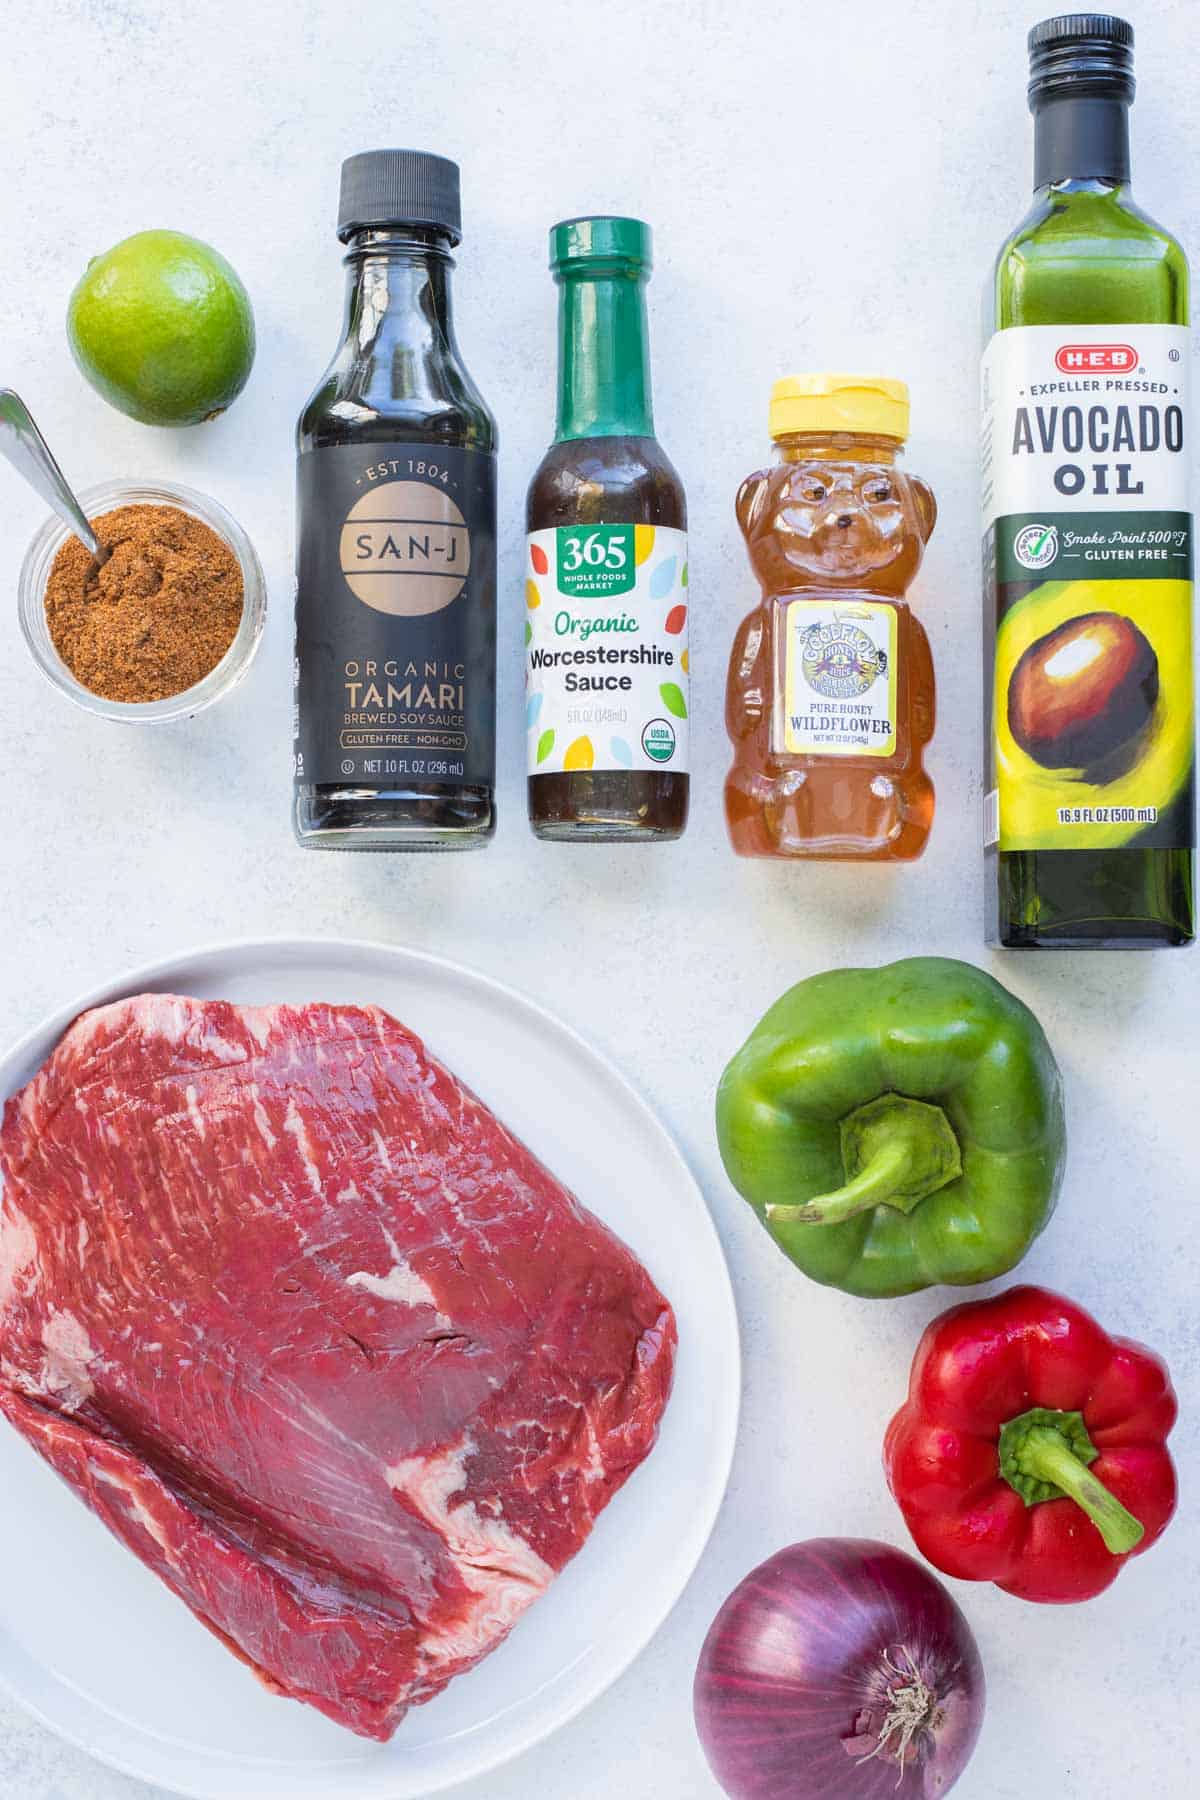 Steak, vegetables, honey, oil, lime juice, soy sauce, taco seasoning, and Worcestershire sauce are the ingredients in this recipe.